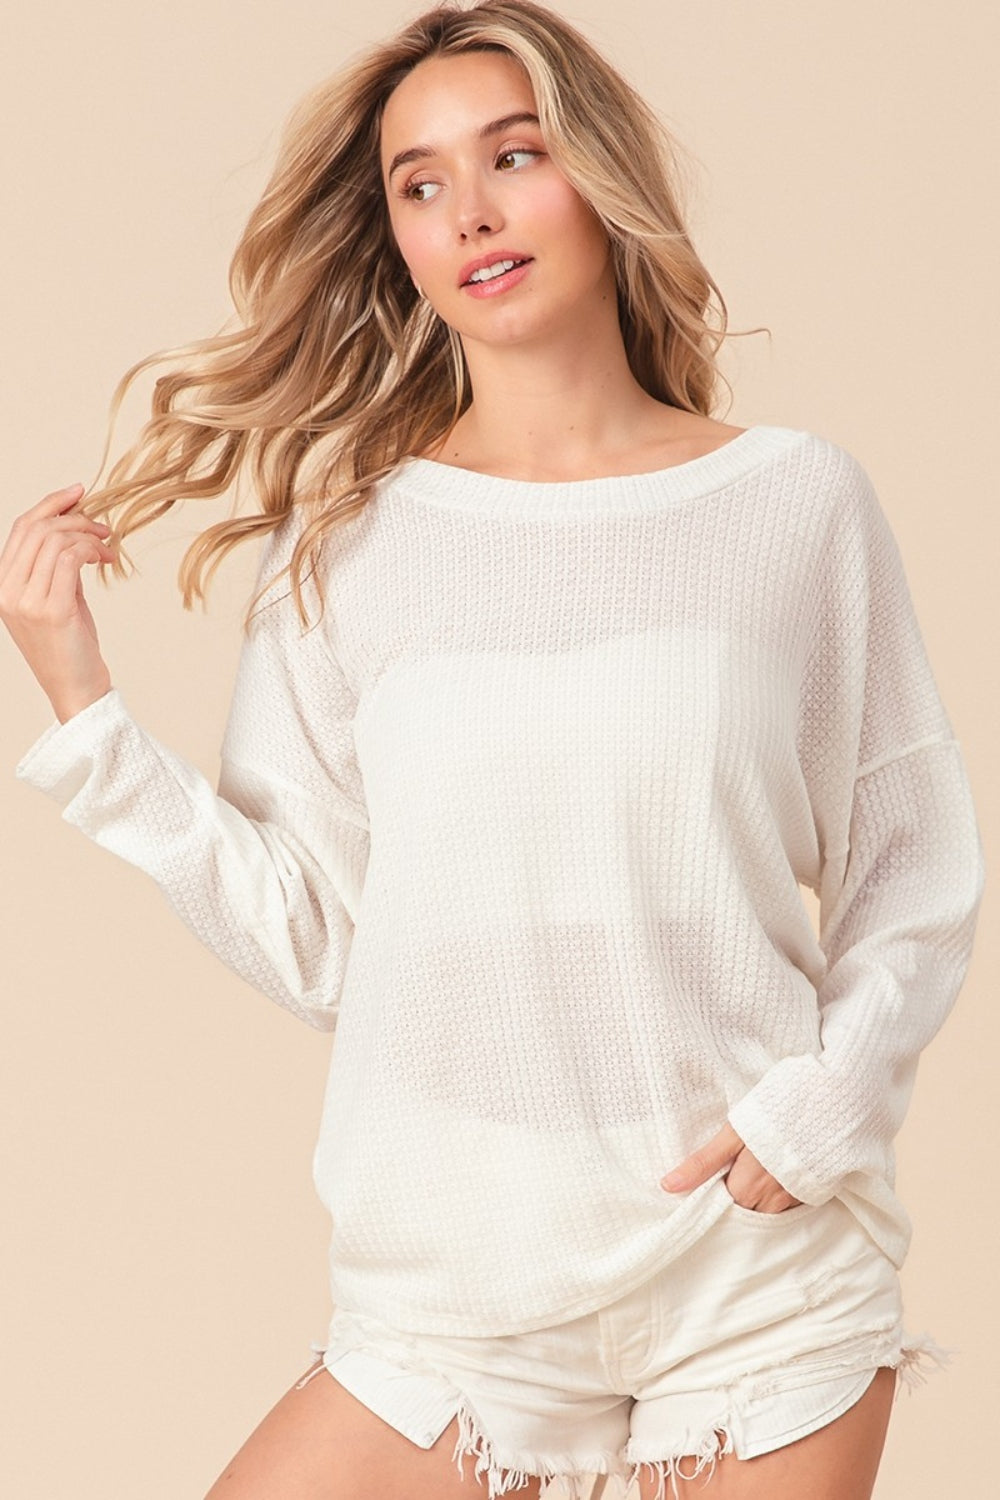 The Waffled Backless Drawstring Top is a flirty and stylish choice for your summer wardrobe. Featuring a waffled texture, this top adds depth and interest to your look. The backless design with a drawstring detail creates a playful and alluring silhouette.  S - XL